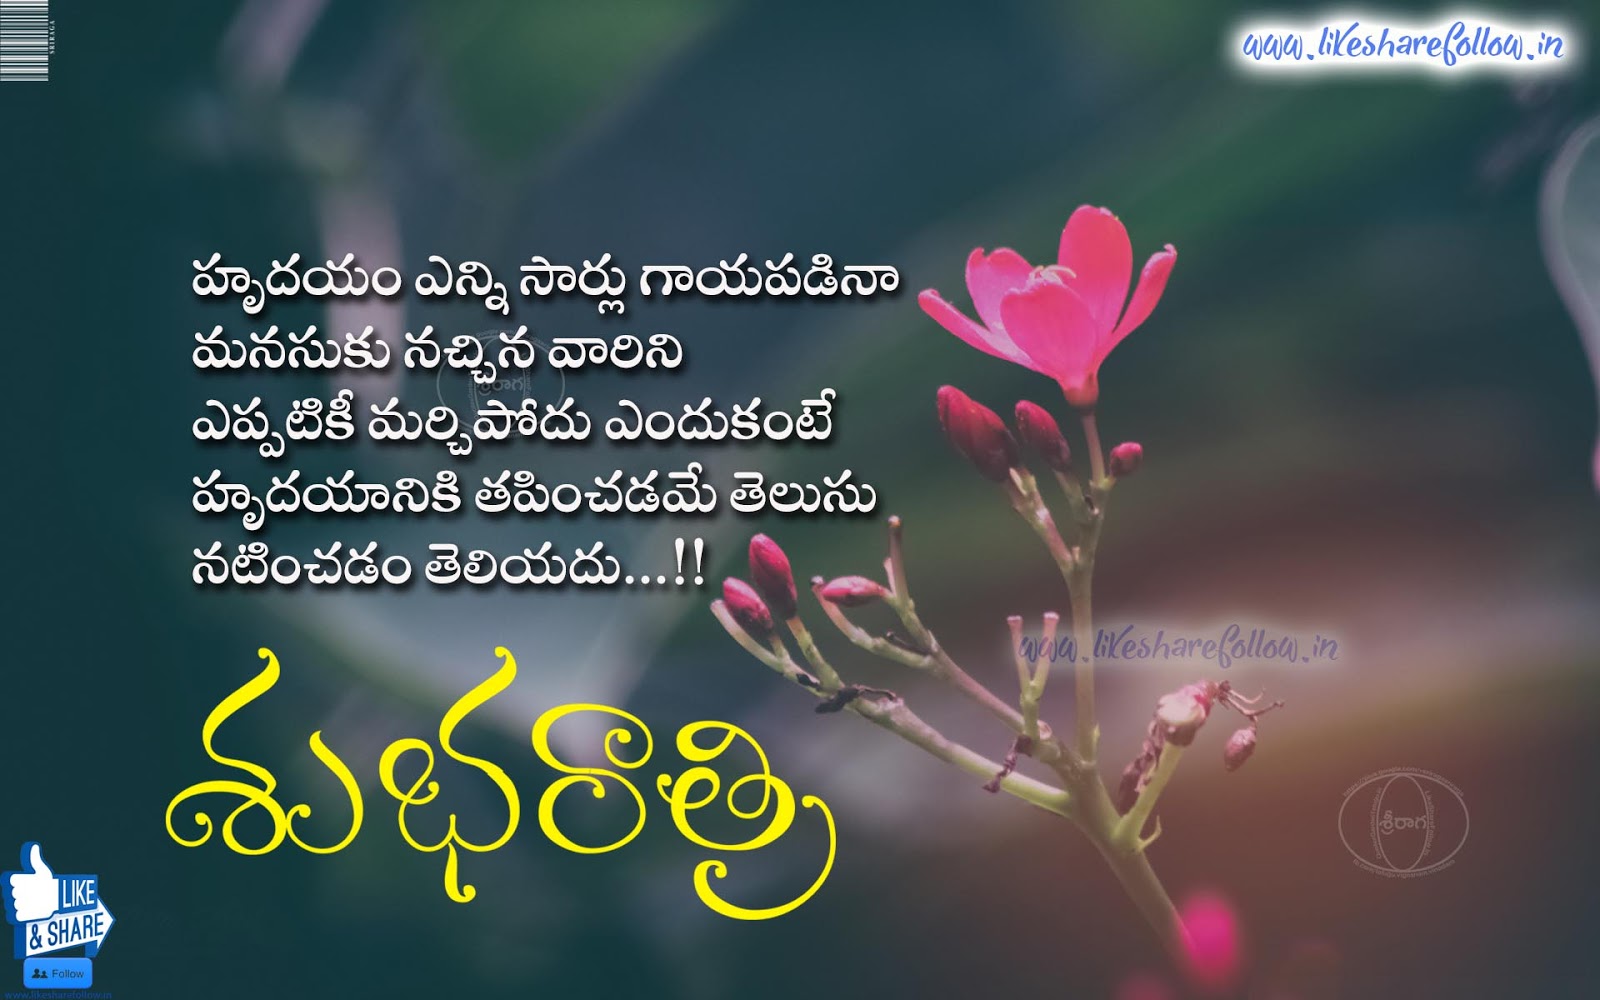 Telugu Good night wishes with Love quotes | Like Share Follow